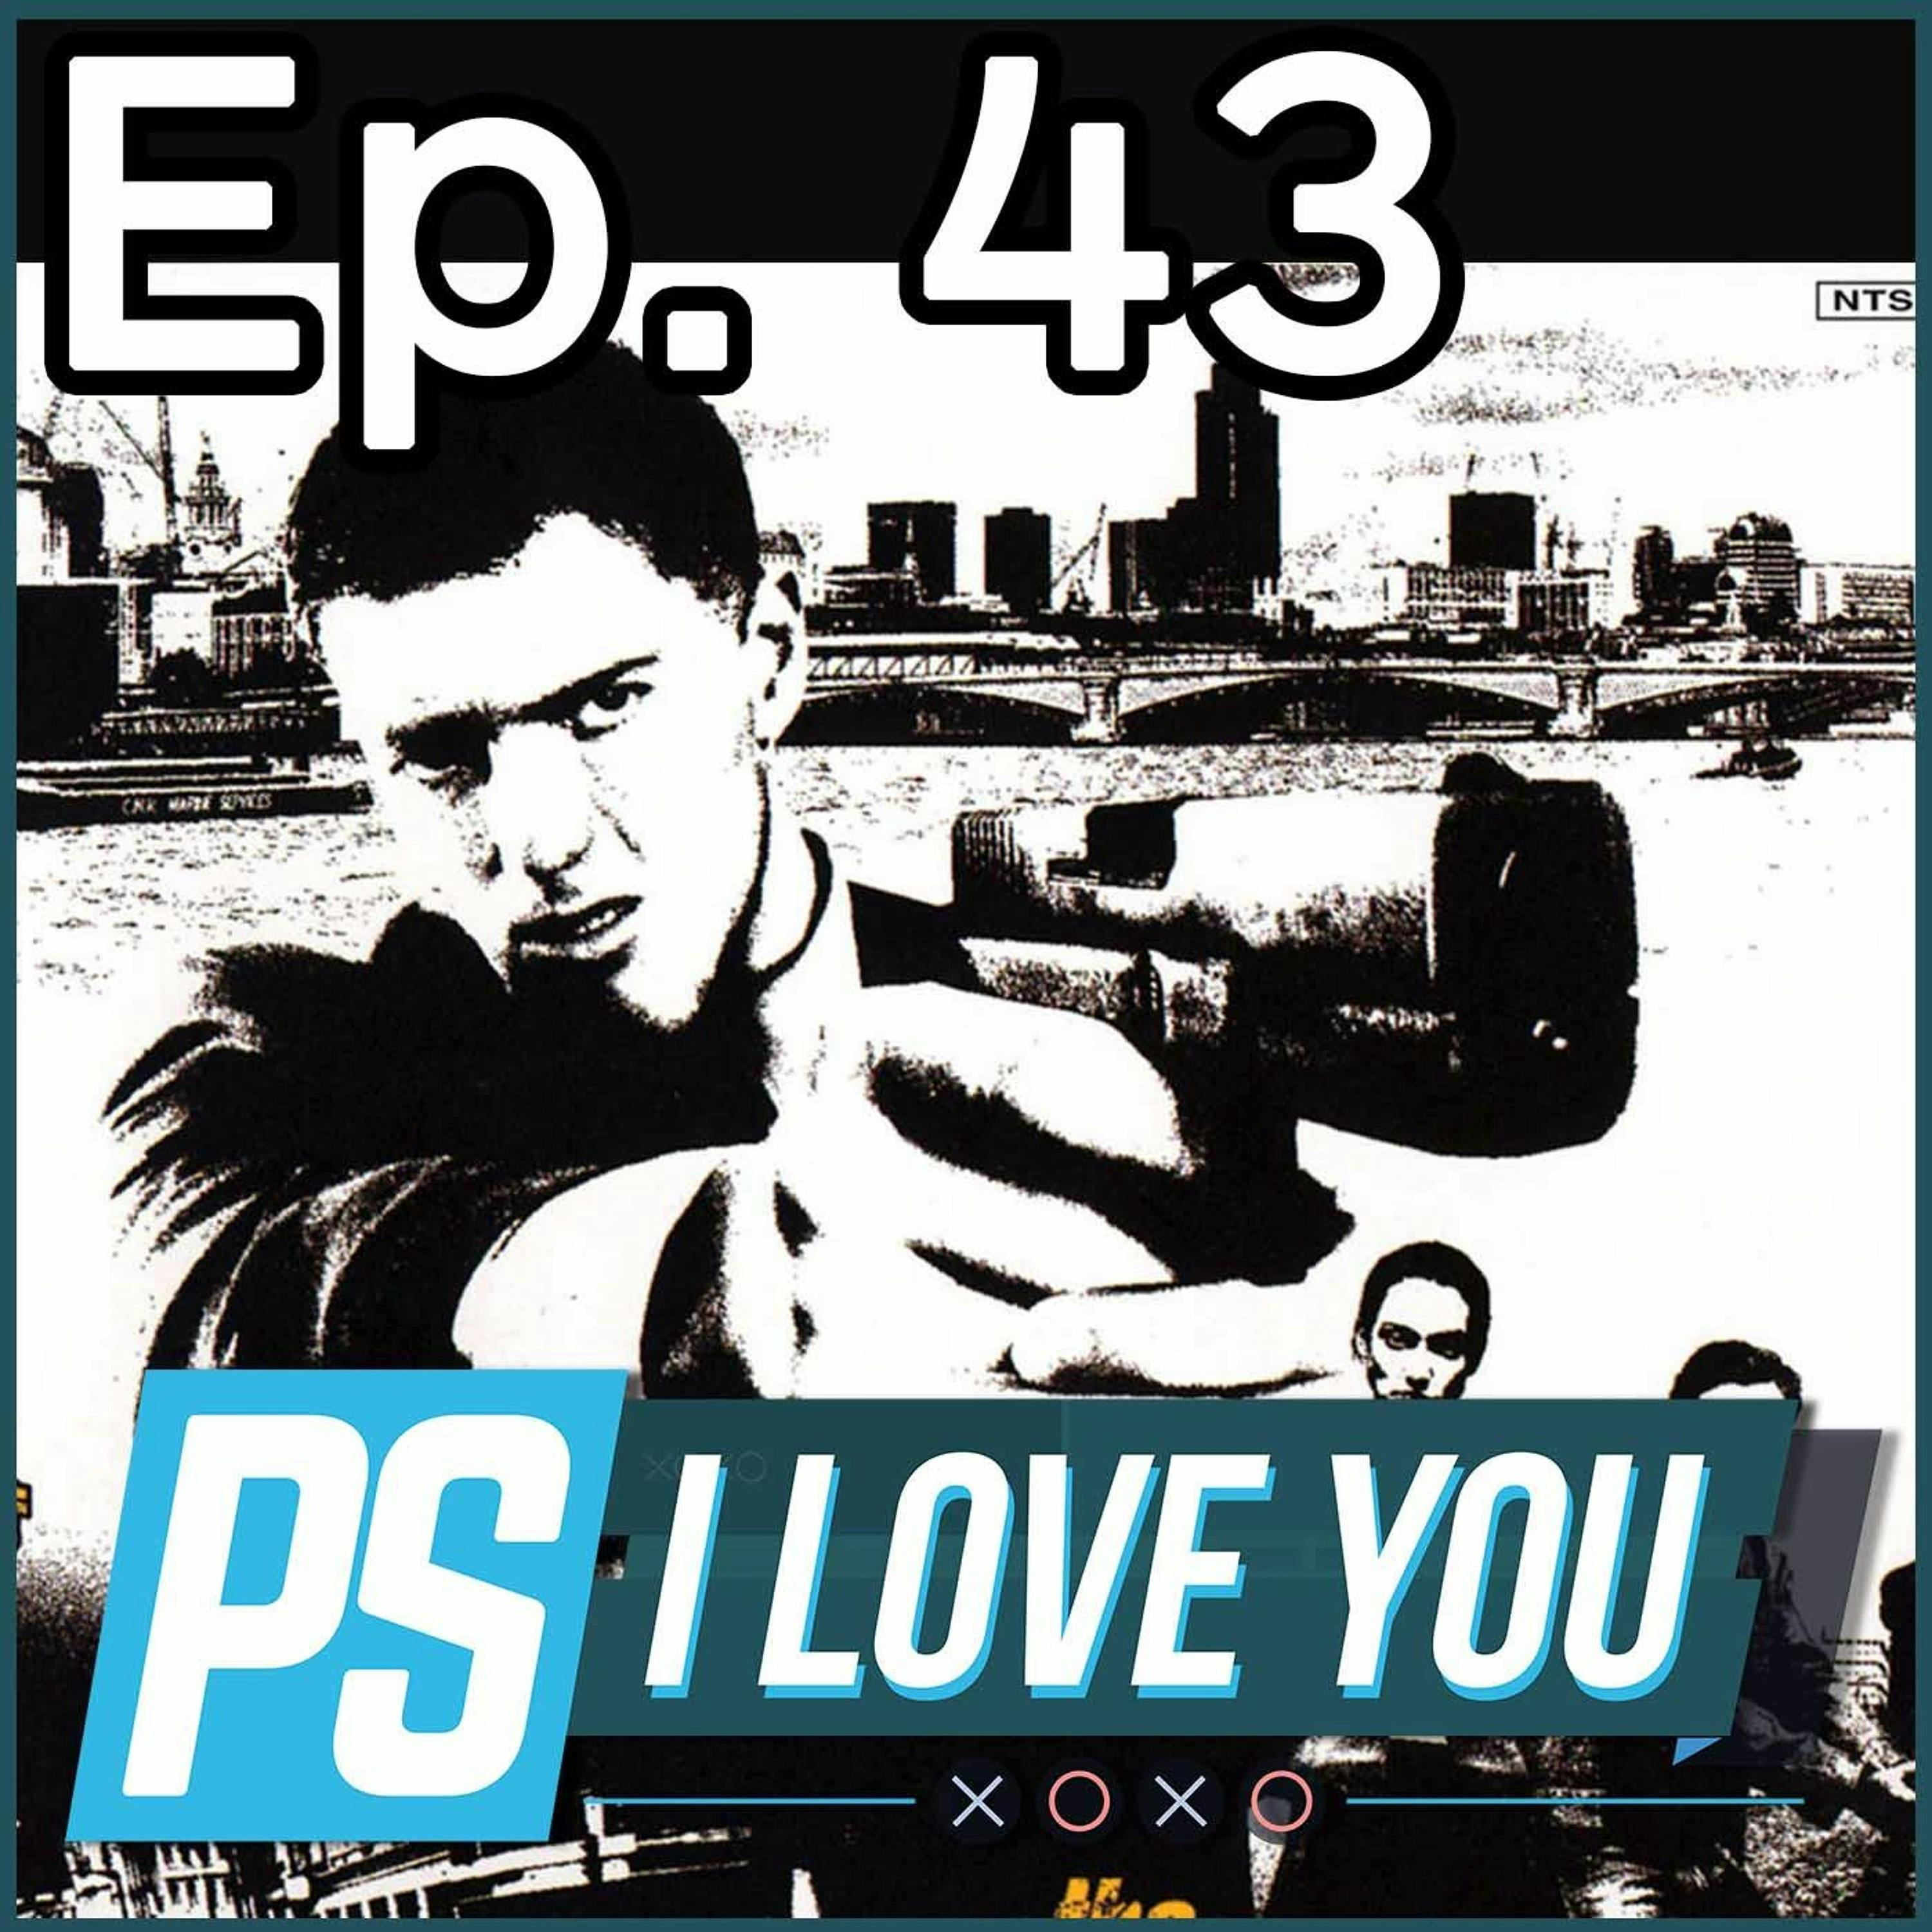 Should Sony Bring Back The Getaway? - PS I Love You XOXO Ep. 43 (Guest Starring Brian Altano)